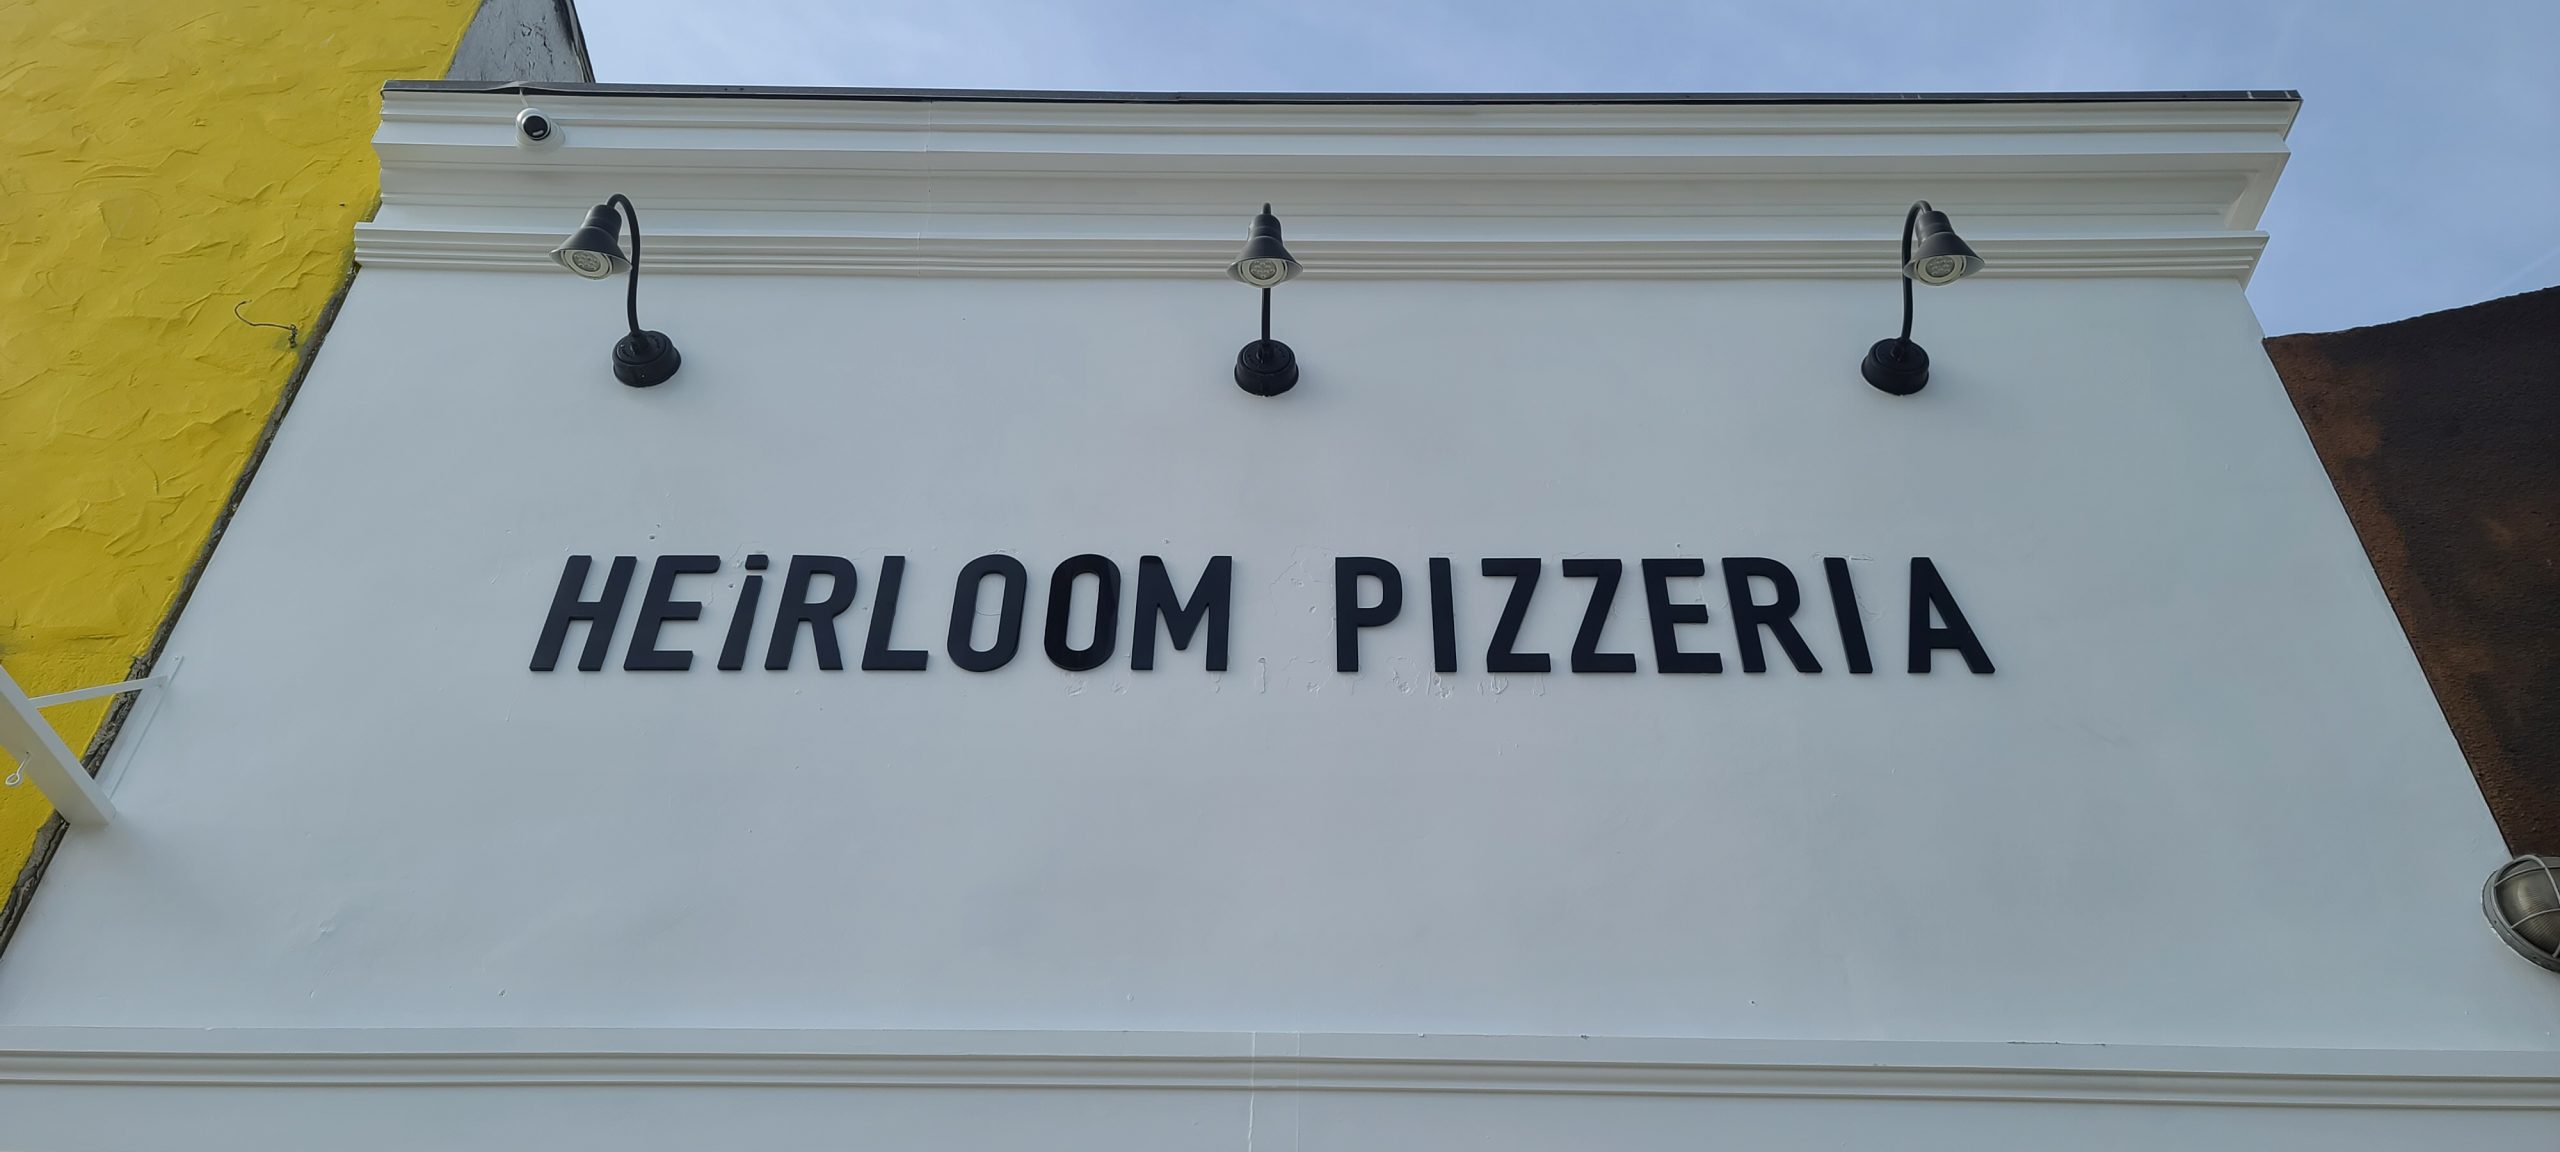 Quality signage increases brand visibility and attract customers. Like these dimensional letters for Heirloom Pizzeria in Los Angeles.